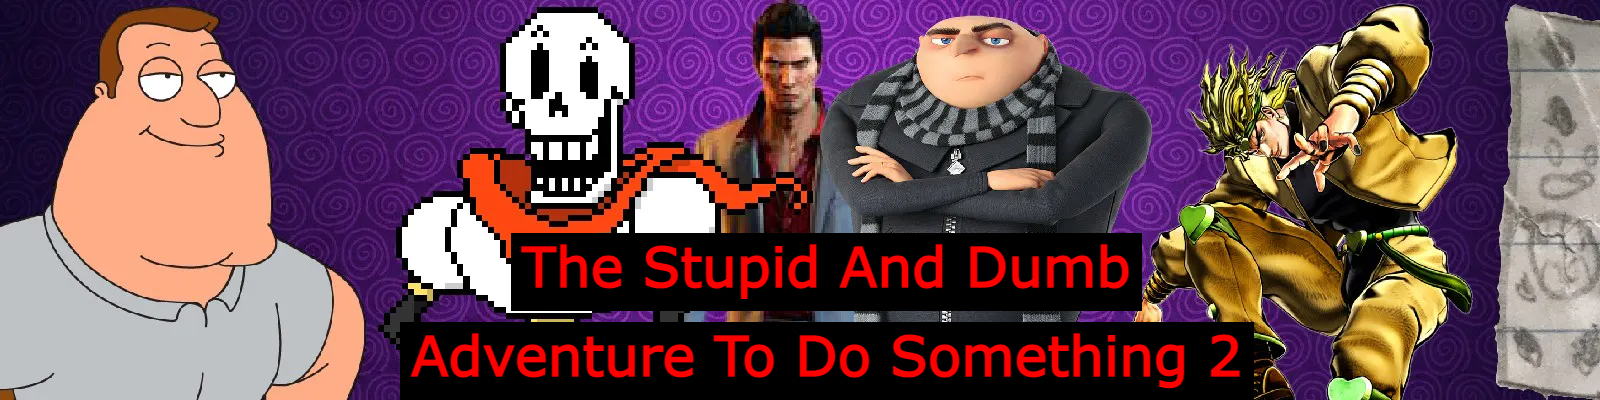 The Stupid And Dumb Adventure To Do Something 2